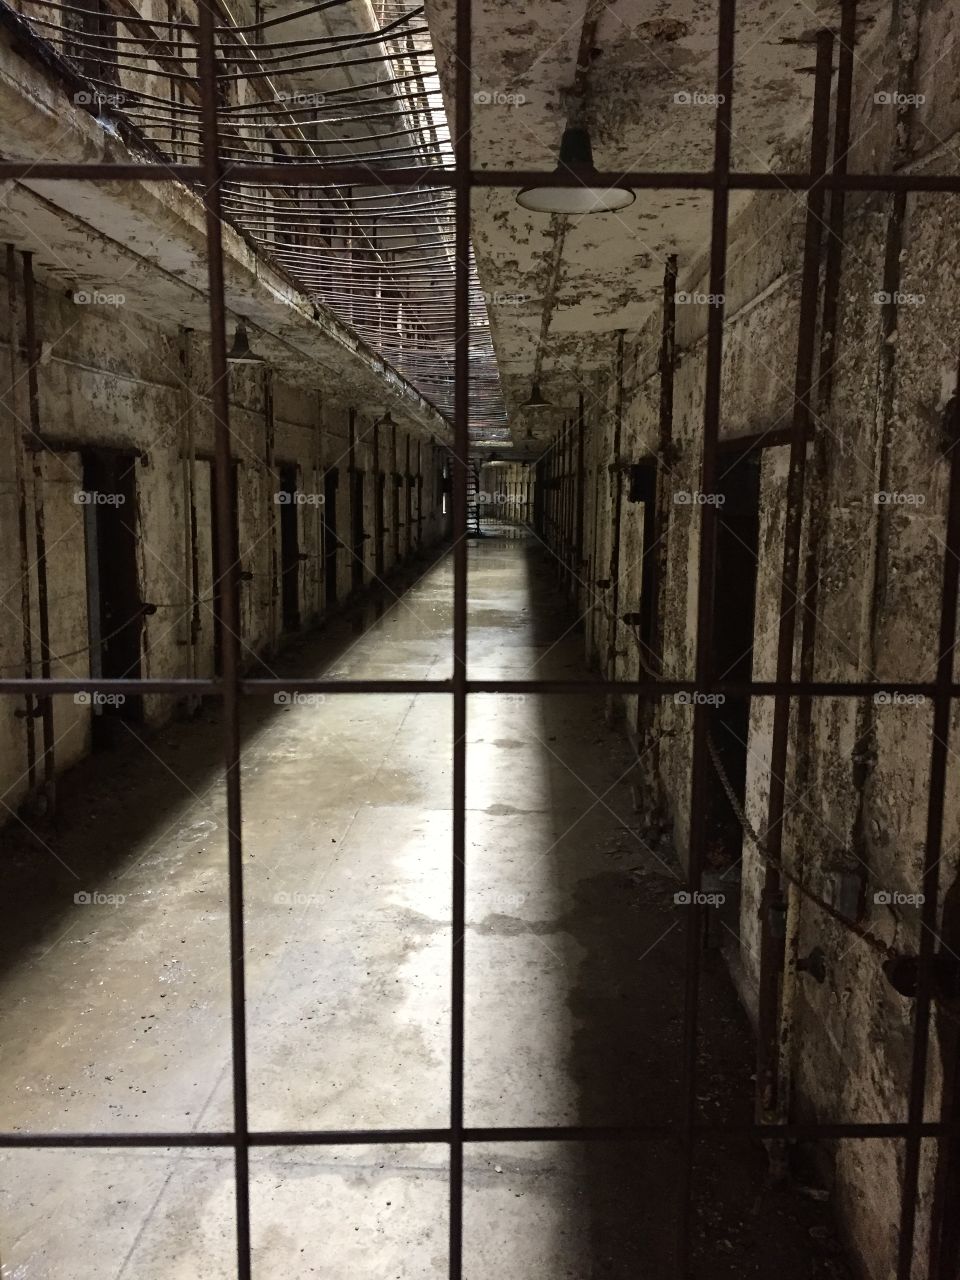 Behind bars at the historic Eastern State Penitentiary in Philadelphia,PA. 